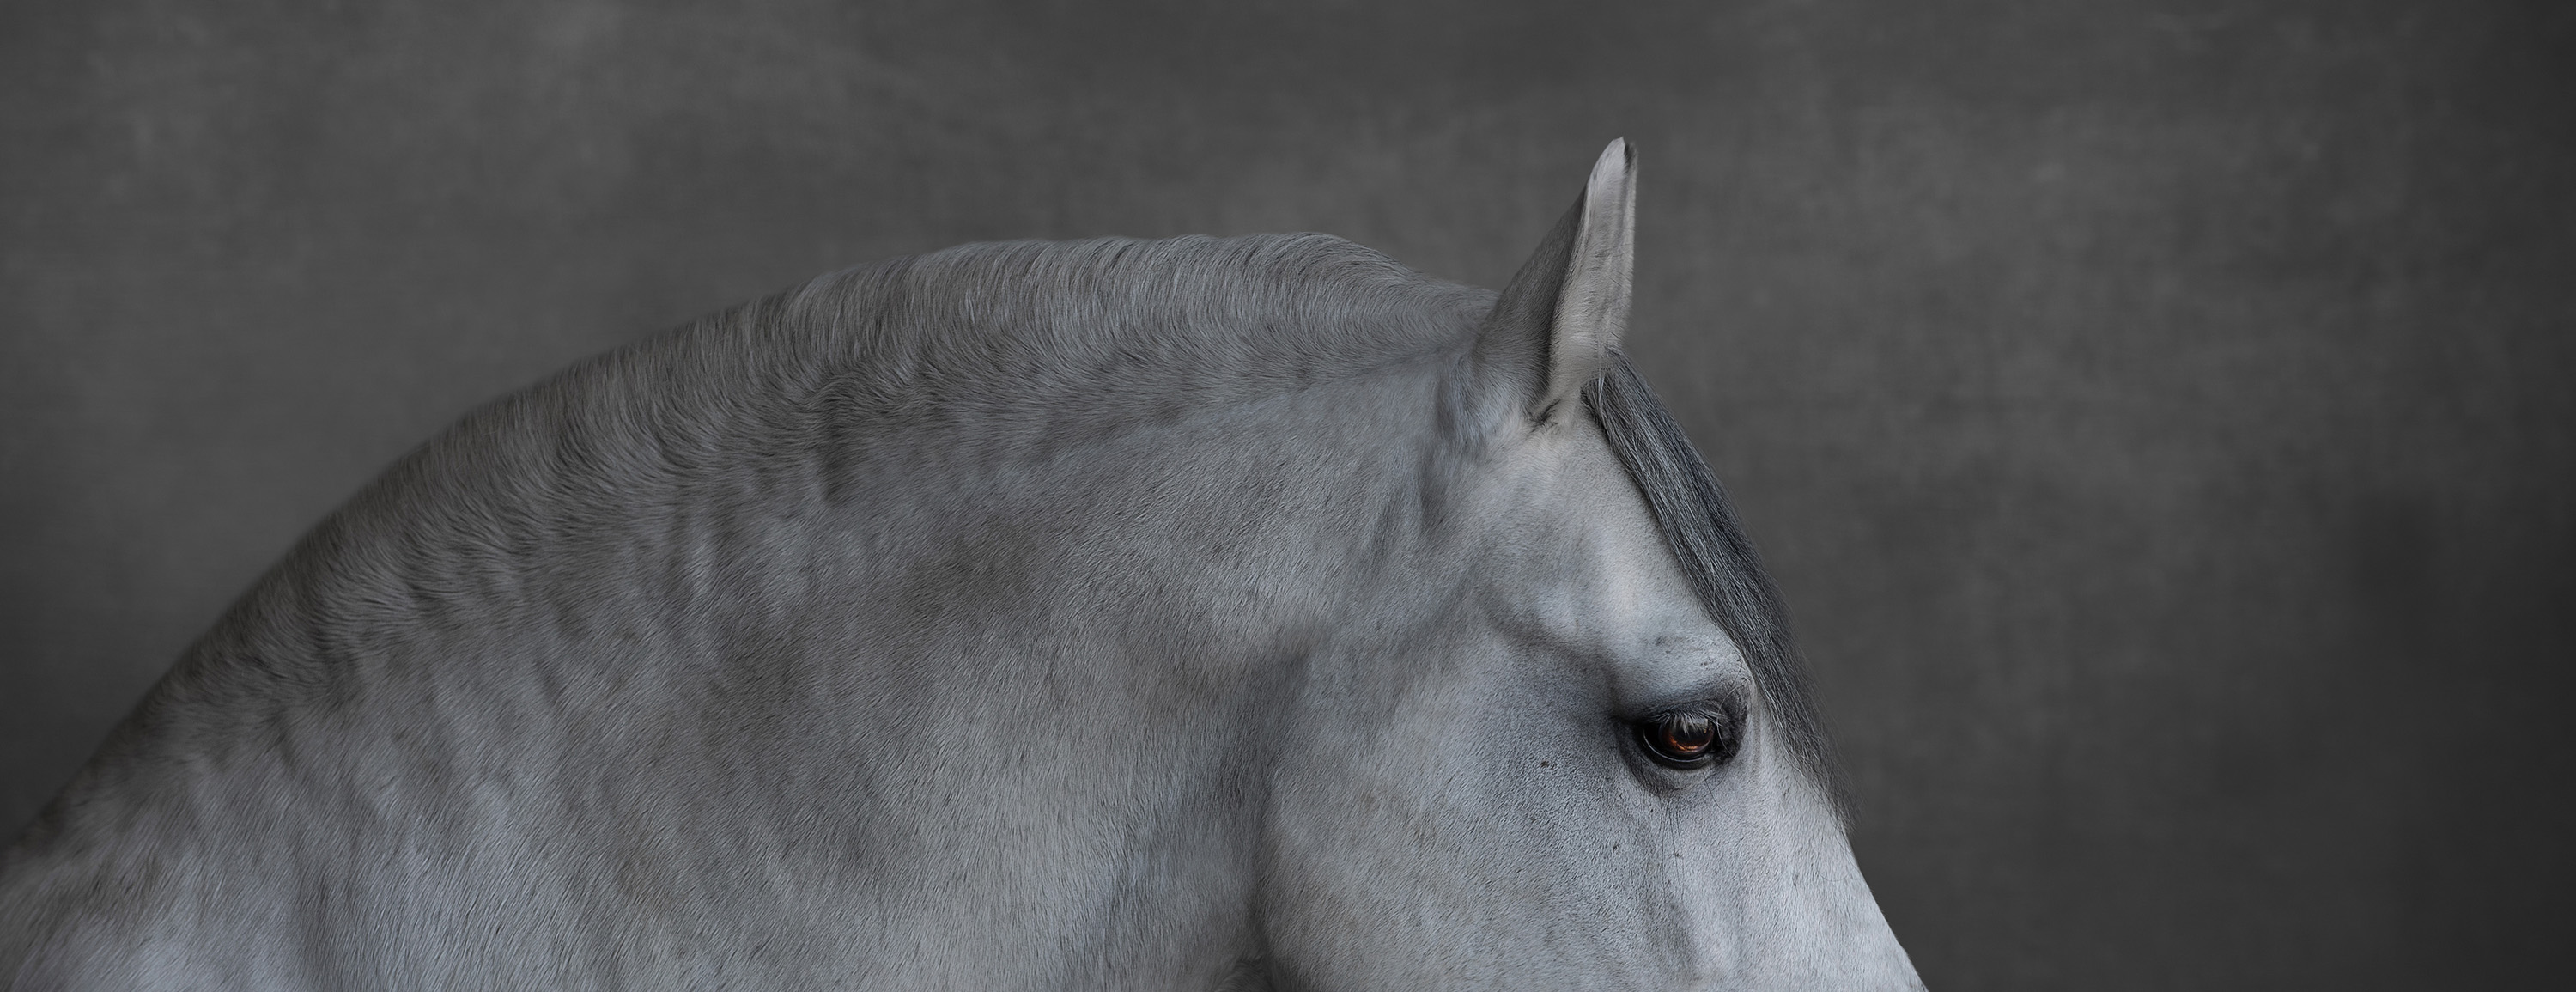 image of a beautiful horse in fine art detail